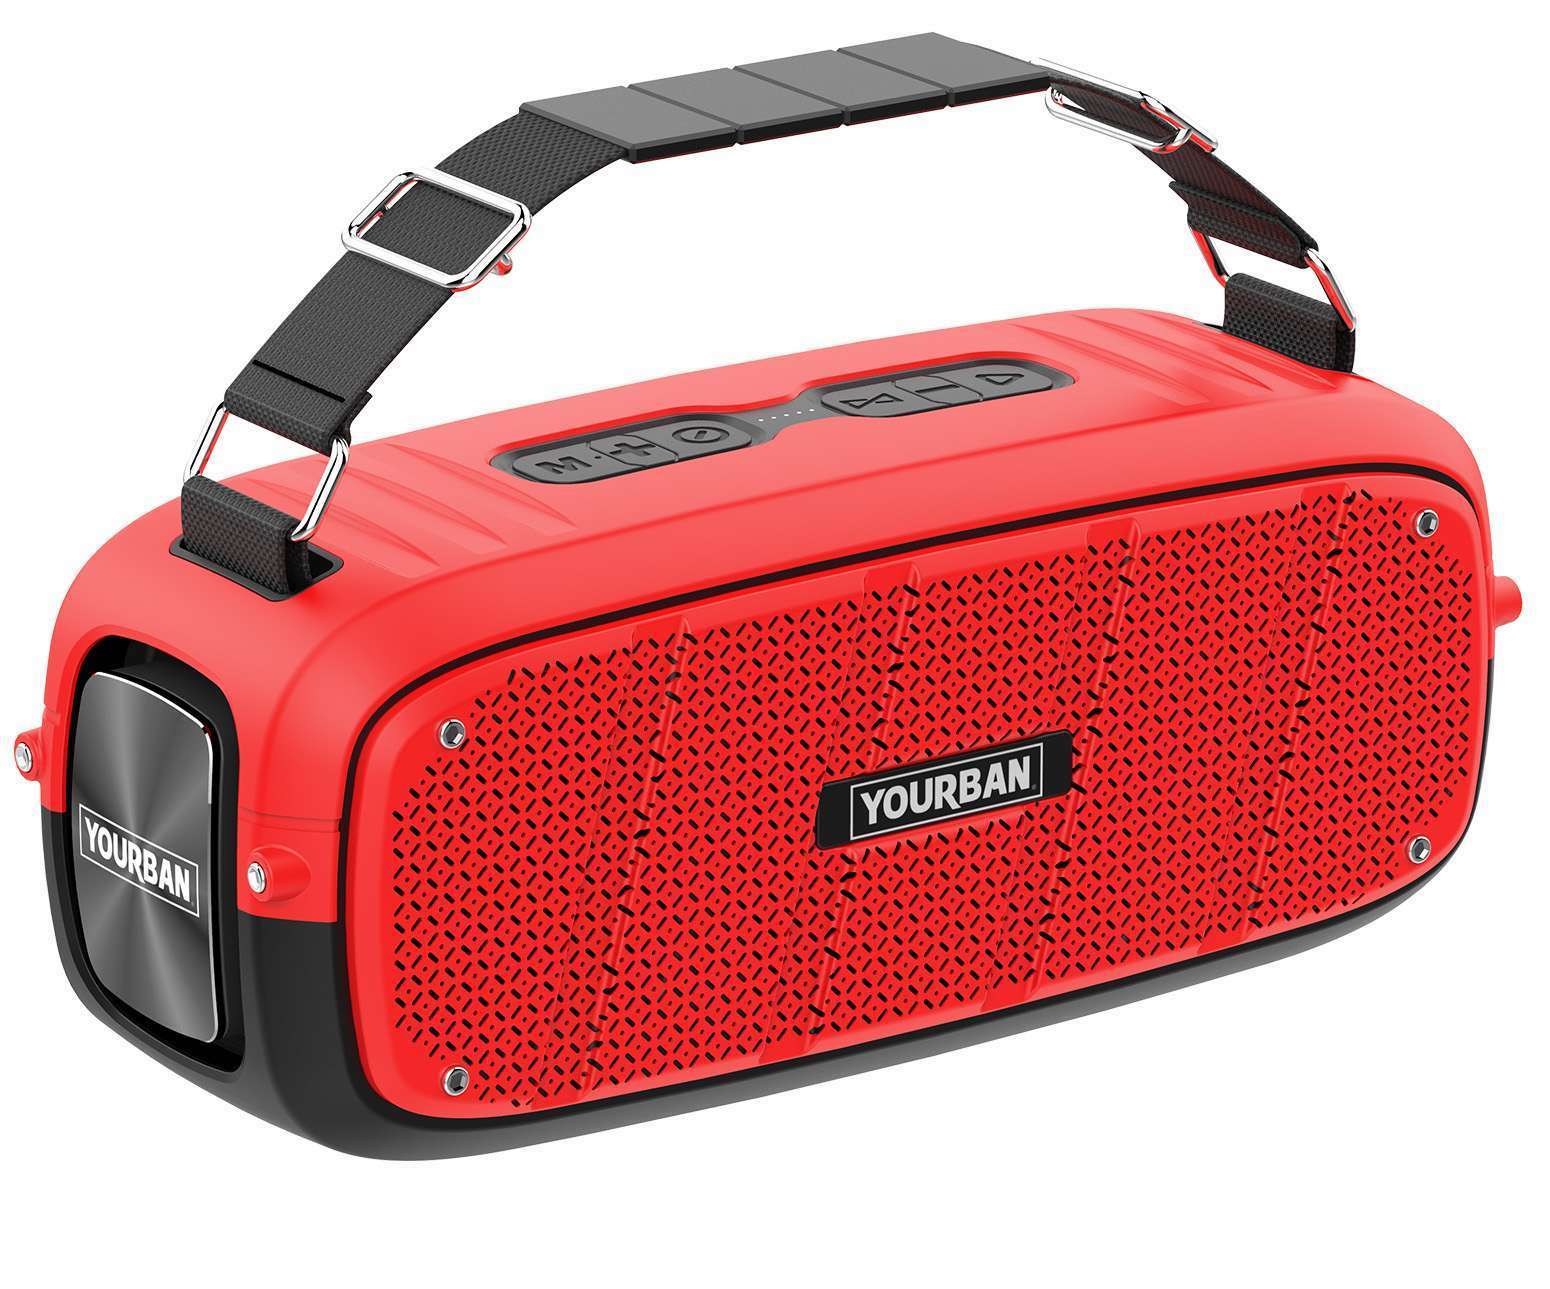 Yourban Getone 60 Red - Portable PA system - Variation 1